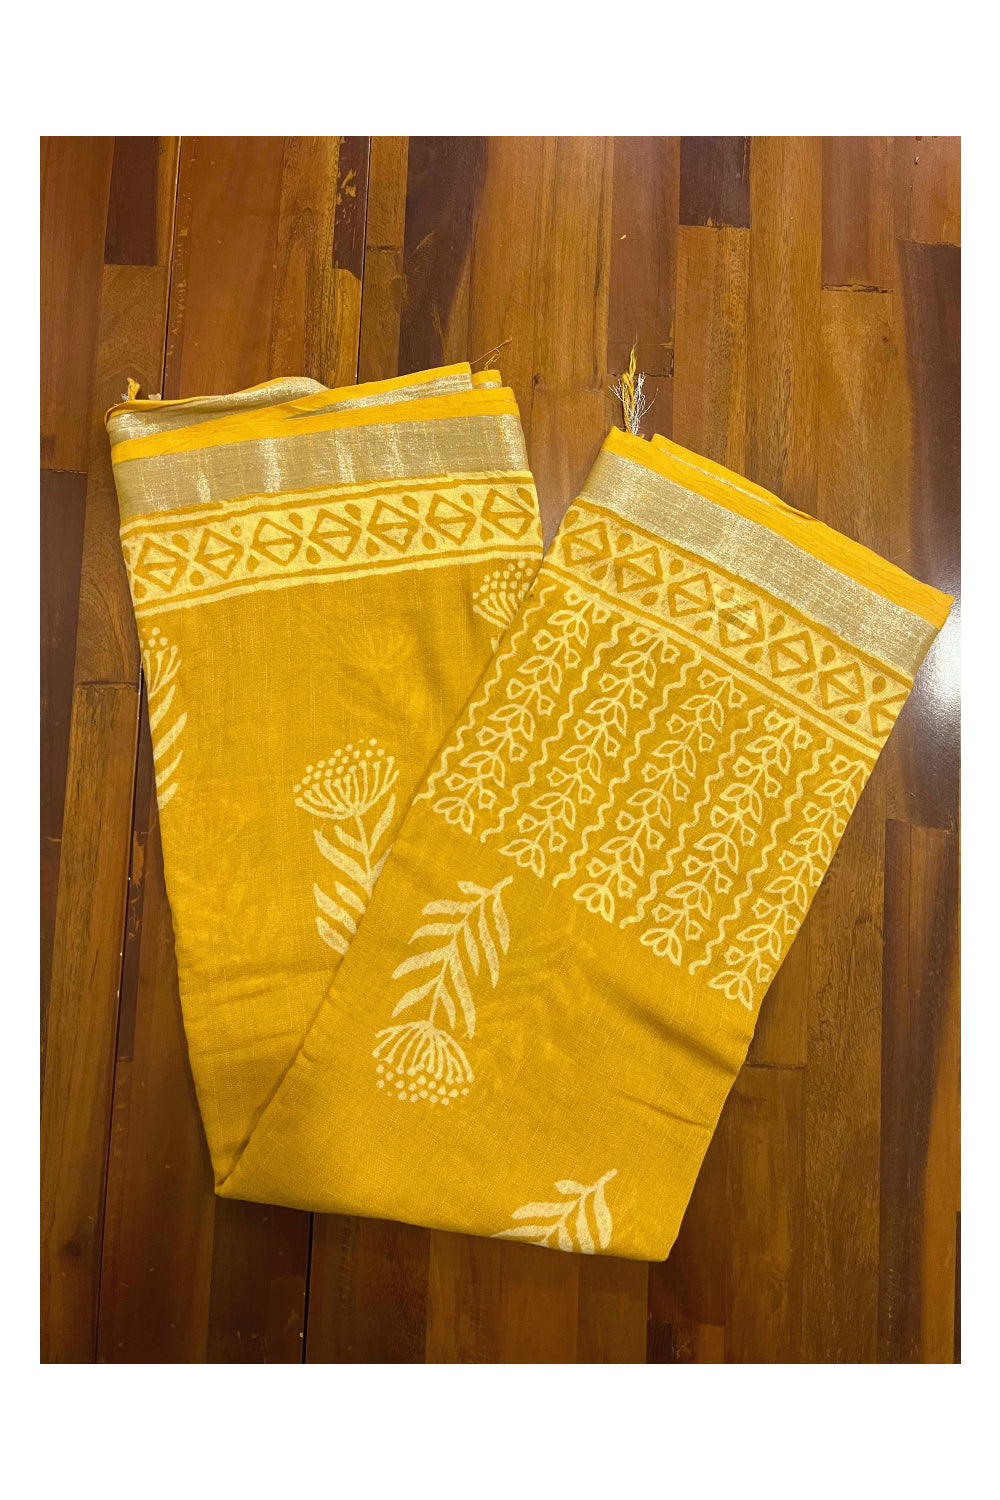 Southloom Linen Yellow Designer Saree with White Prints and Tassels on Pallu